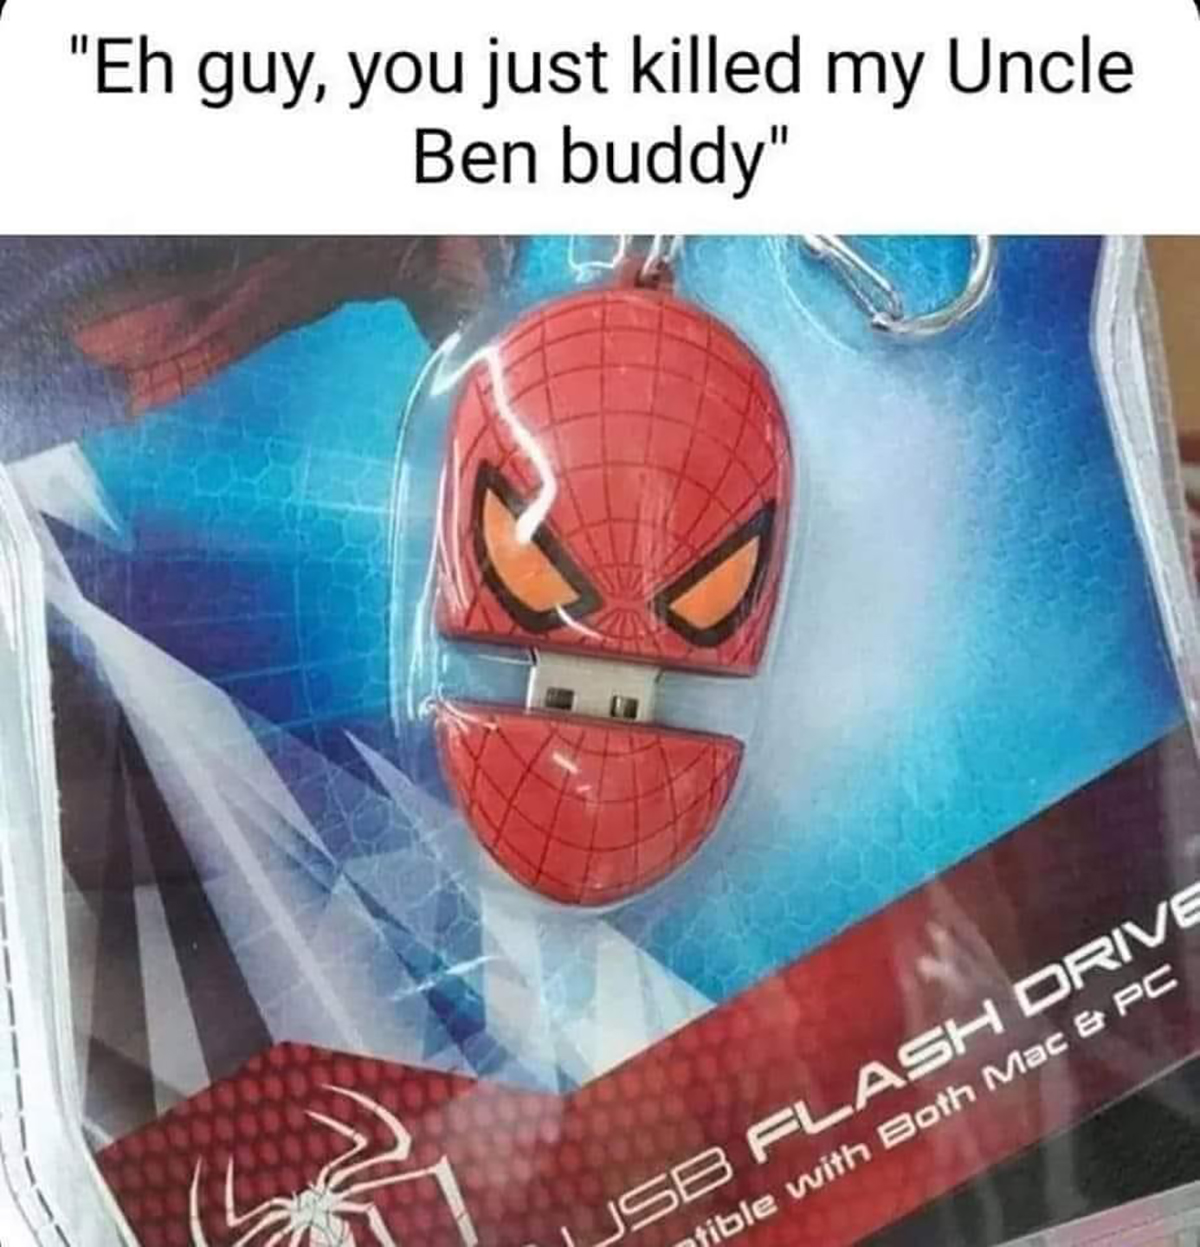 gaming memes - canadian spider man meme - "Eh guy, you just killed my Uncle Ben buddy" 2 Usb Flash Drive tible with Both Mac & Pc